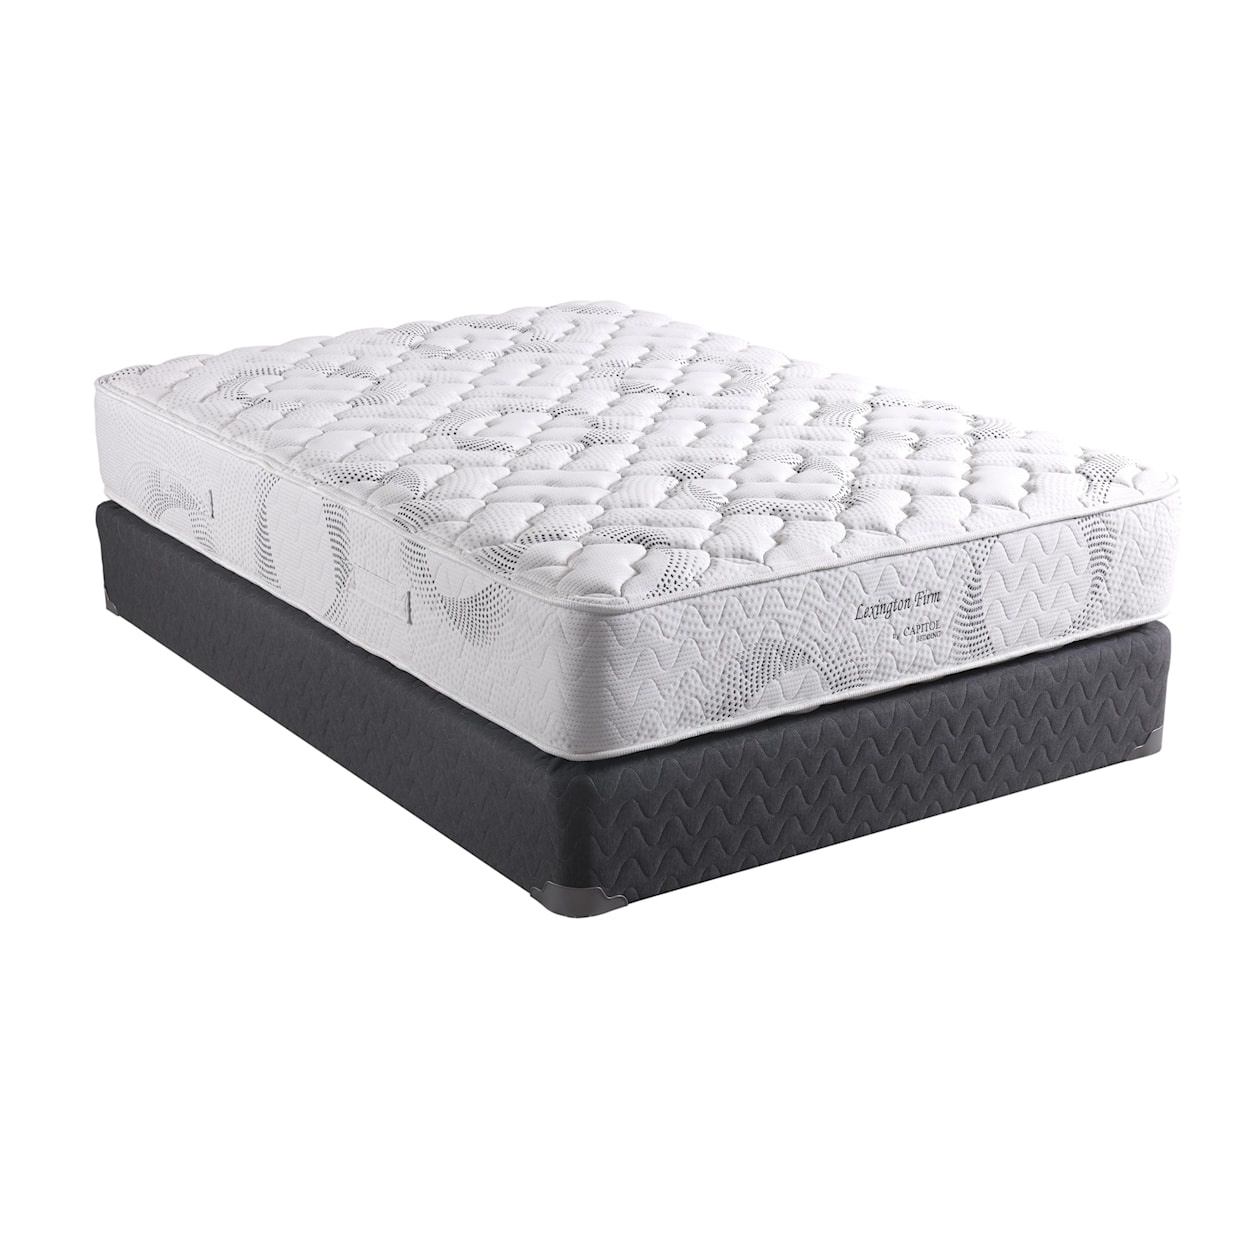 Capitol Bedding Lexington Firm 2023 Twin Firm Two Sided Mattress Set